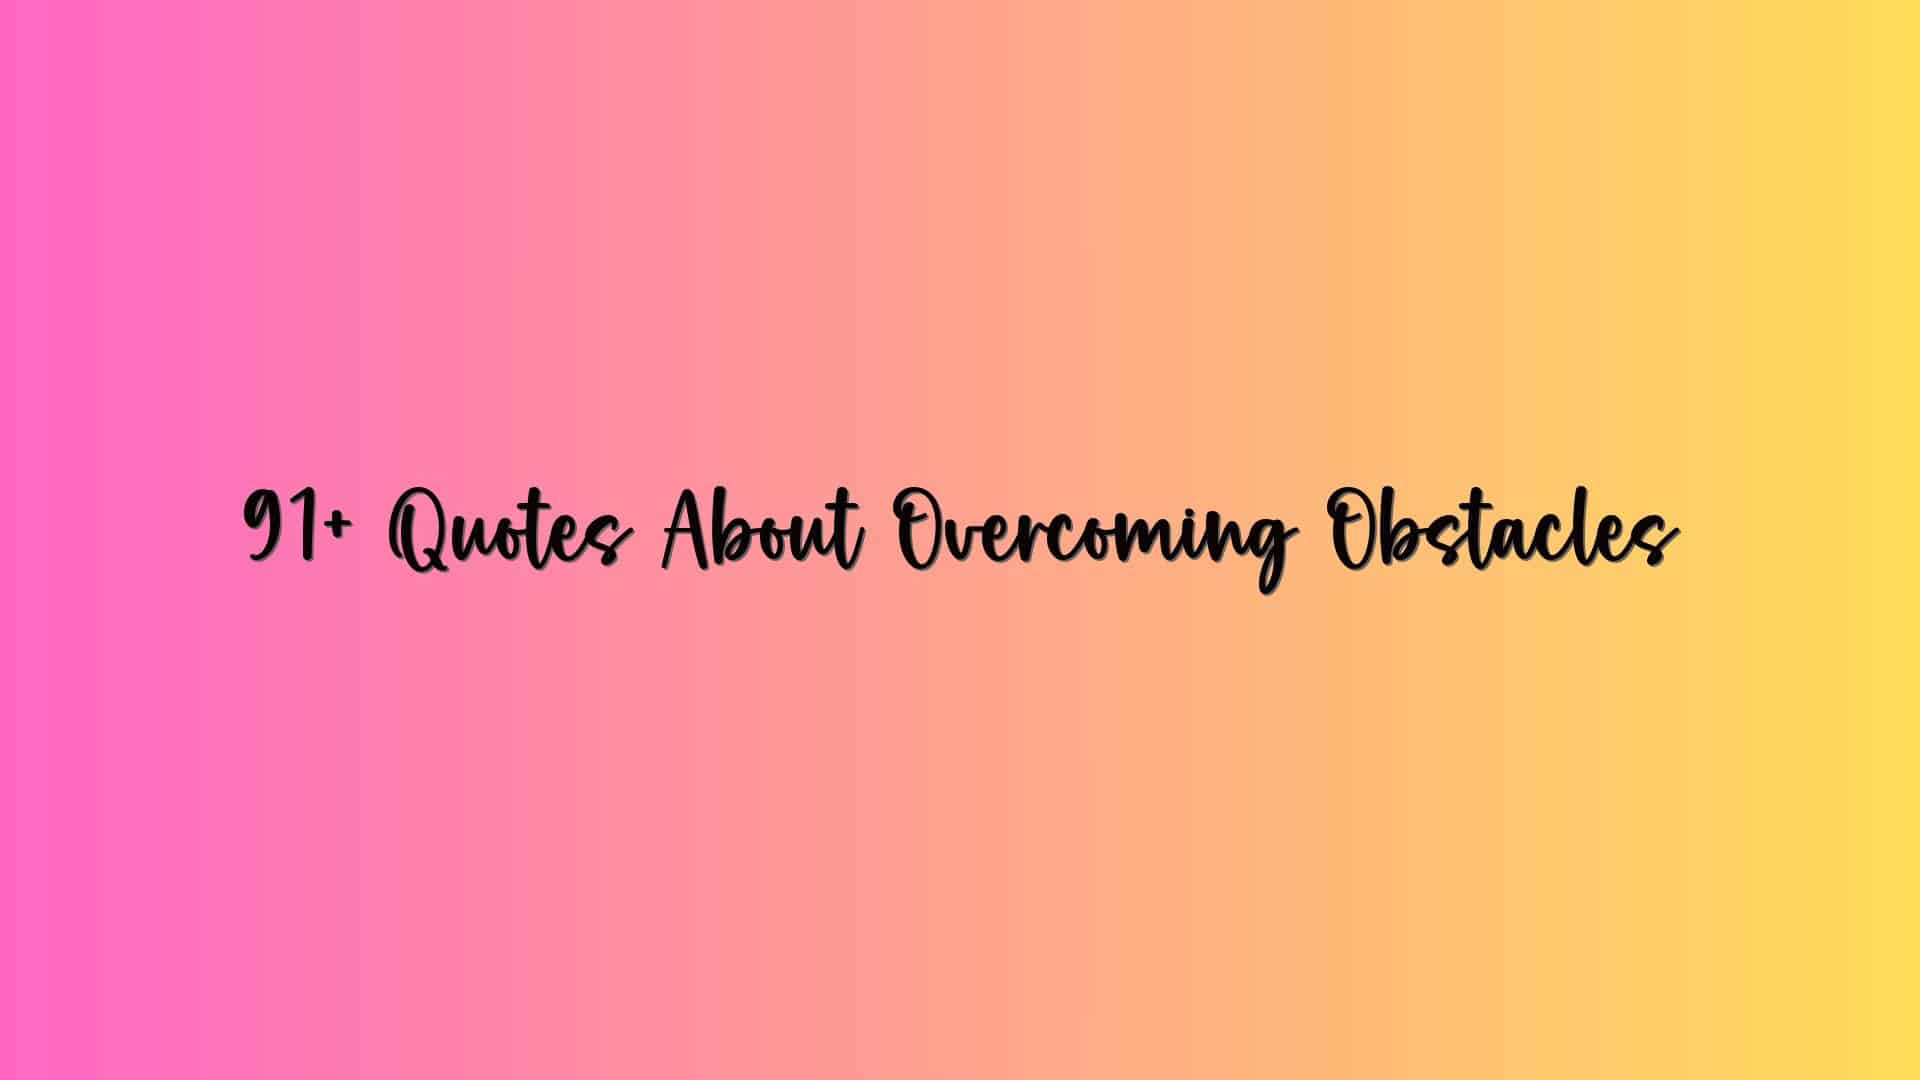 91+ Quotes About Overcoming Obstacles